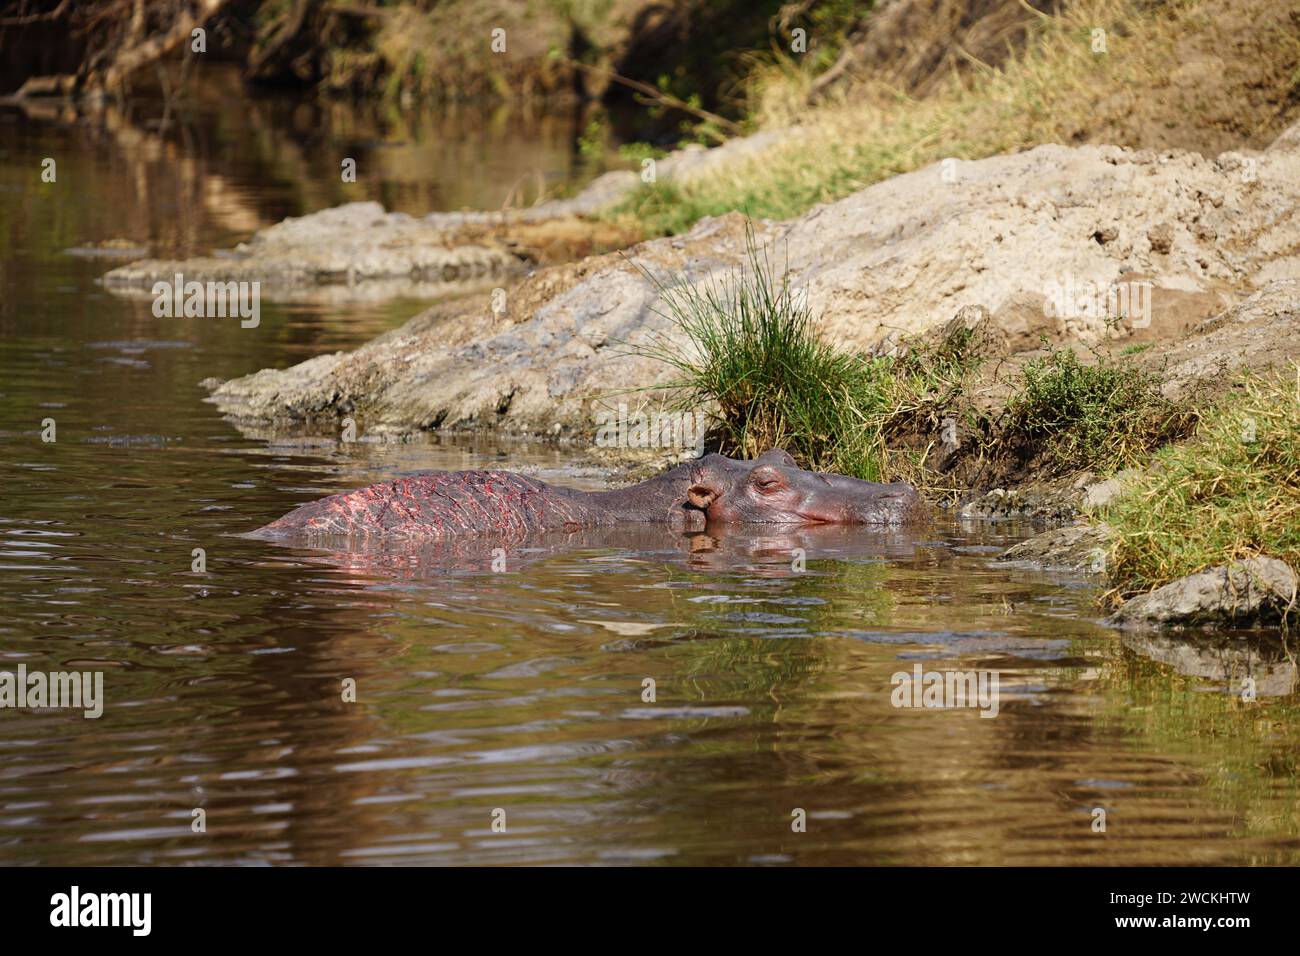 hippos in pond, african wilderness, water, grass Stock Photo